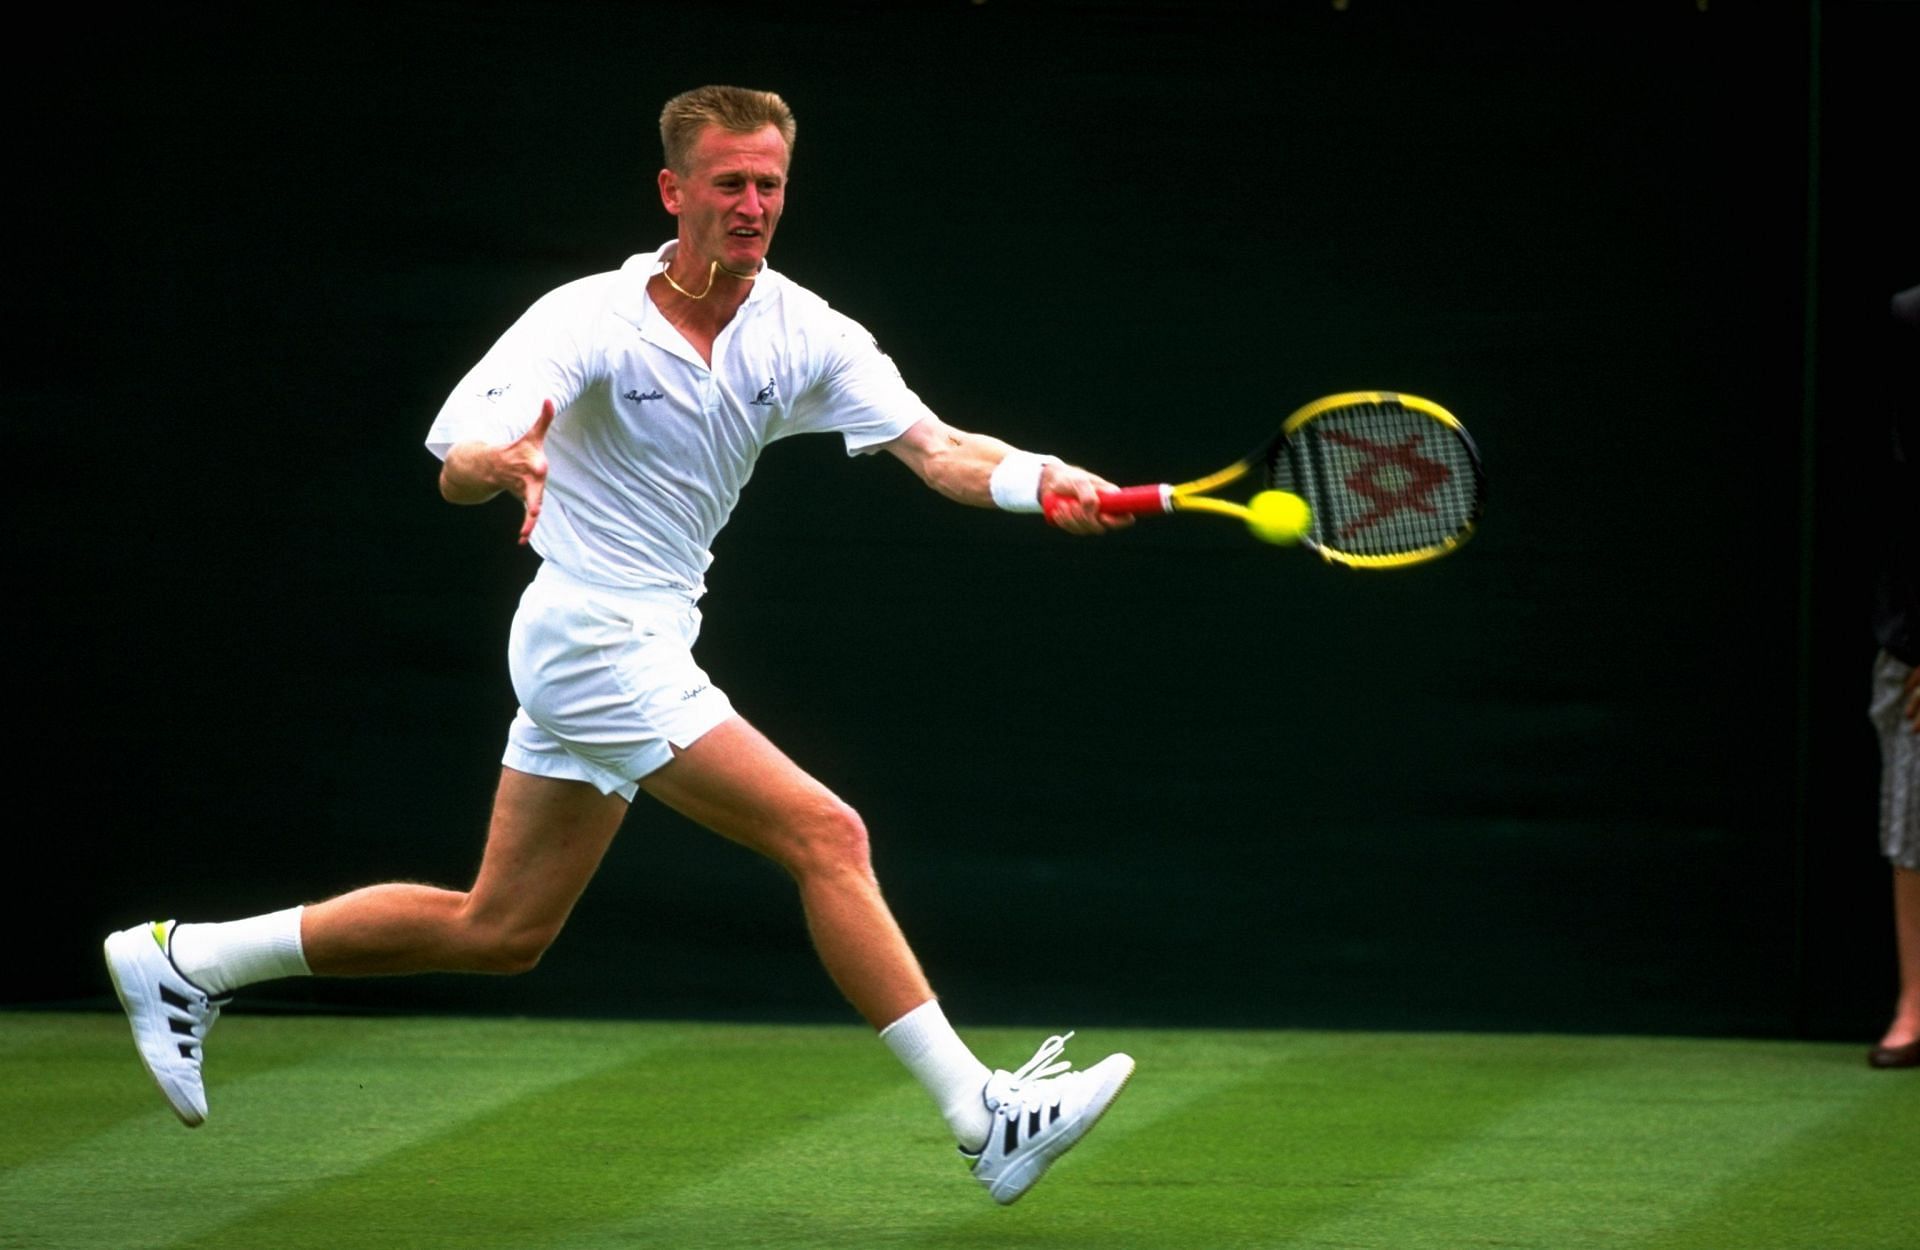 Petr Korda was accused of doping during the 1998 Wimbledon Championship